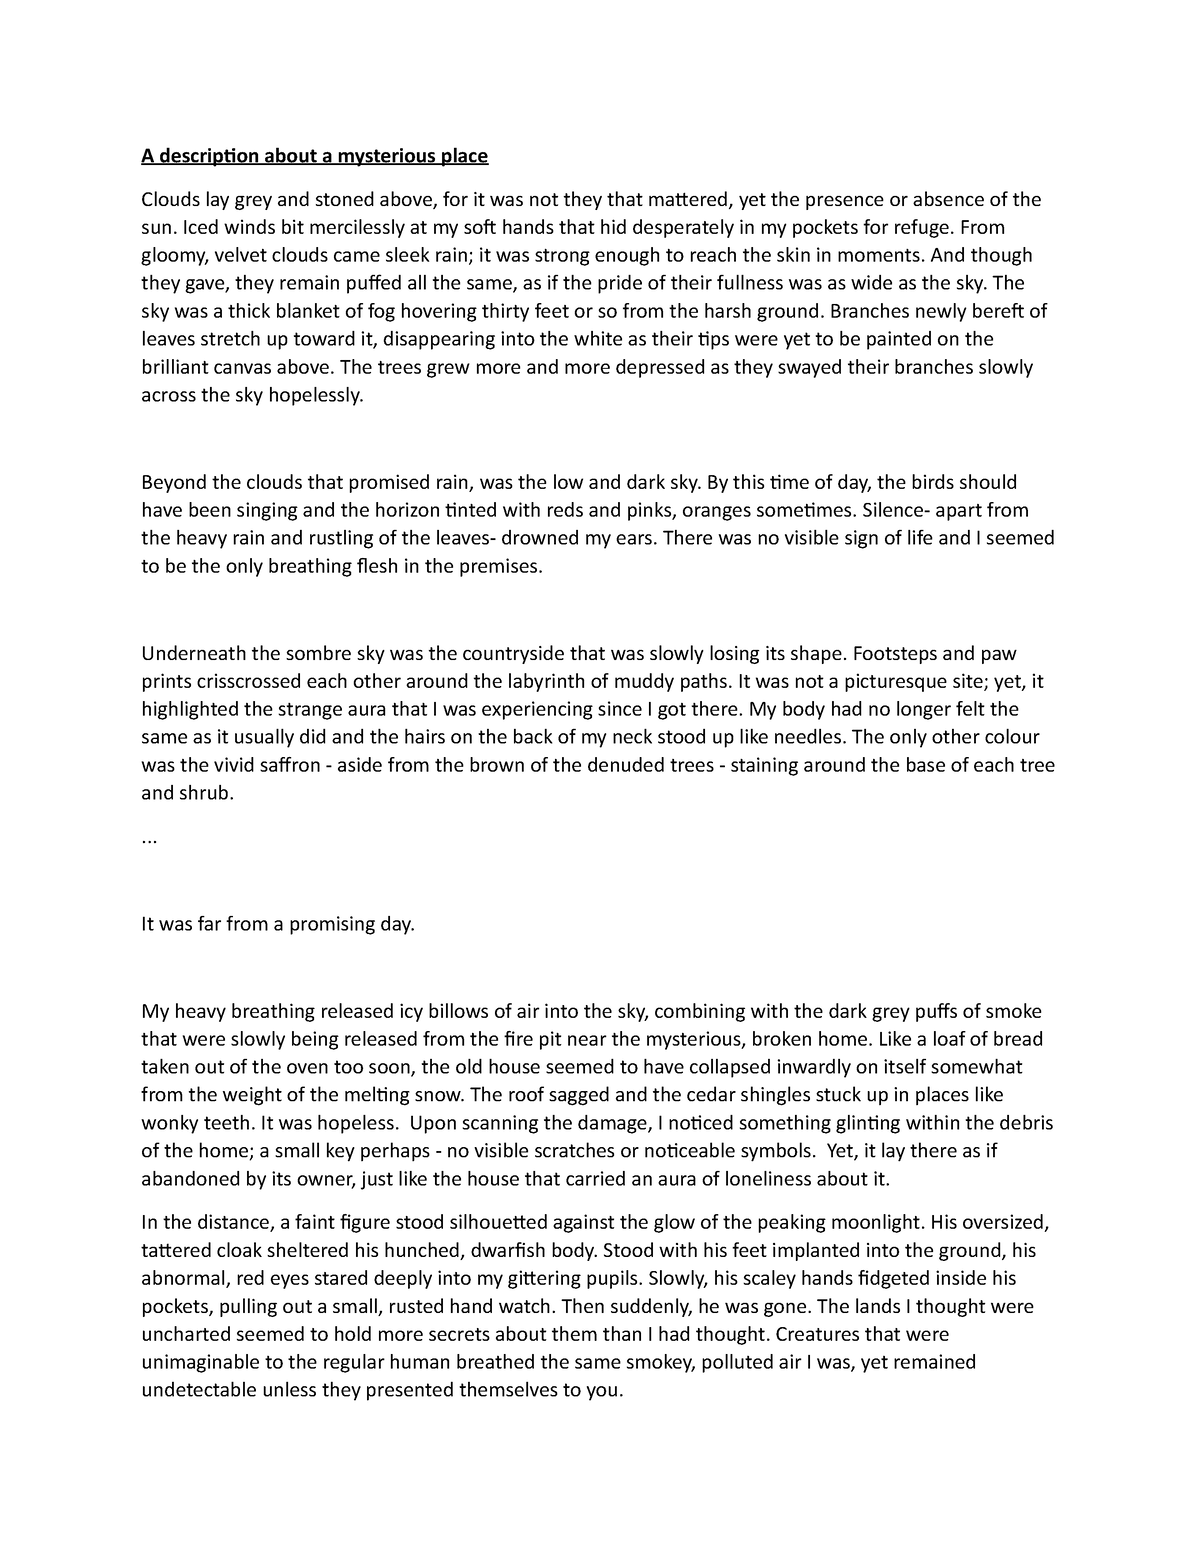 essay on mysterious death for class 7